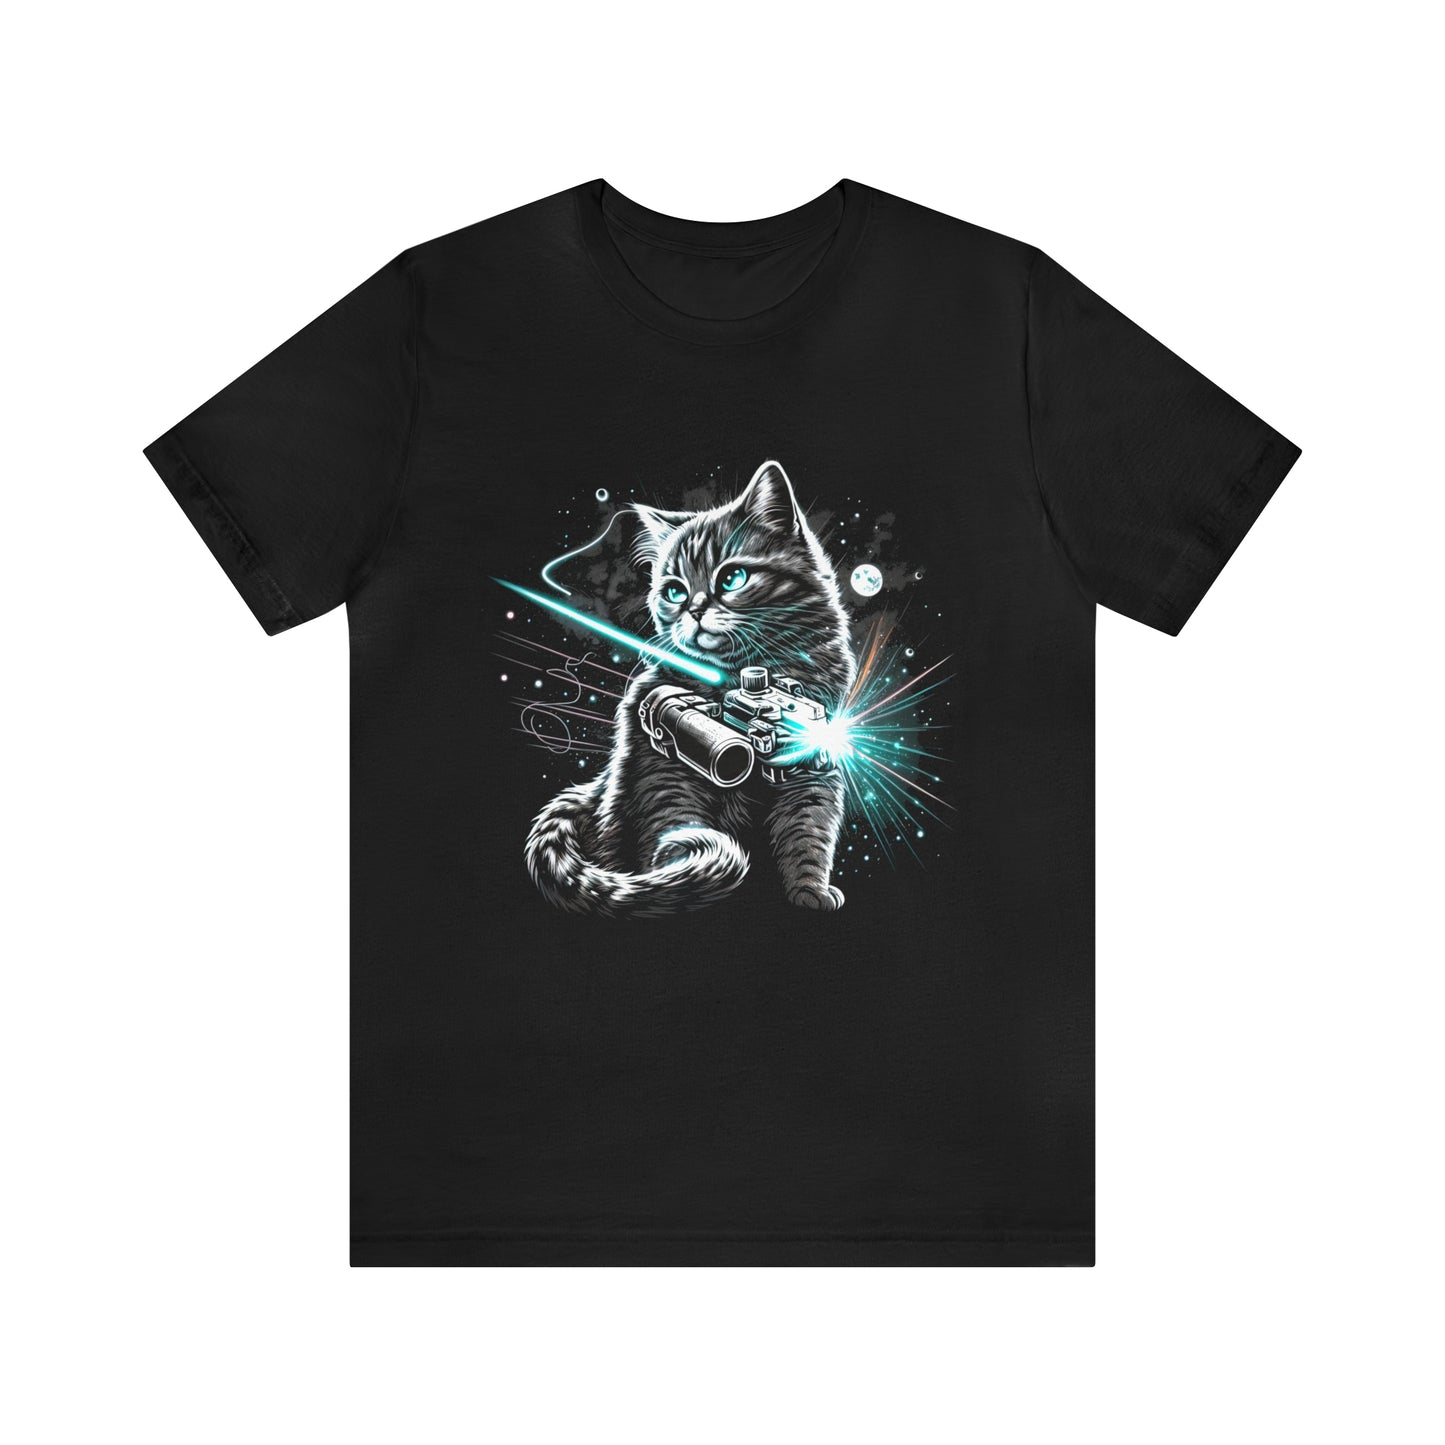 psychedelicBRANDz's Starlight Saberclaw featuring a warrior space cat on a black shirt